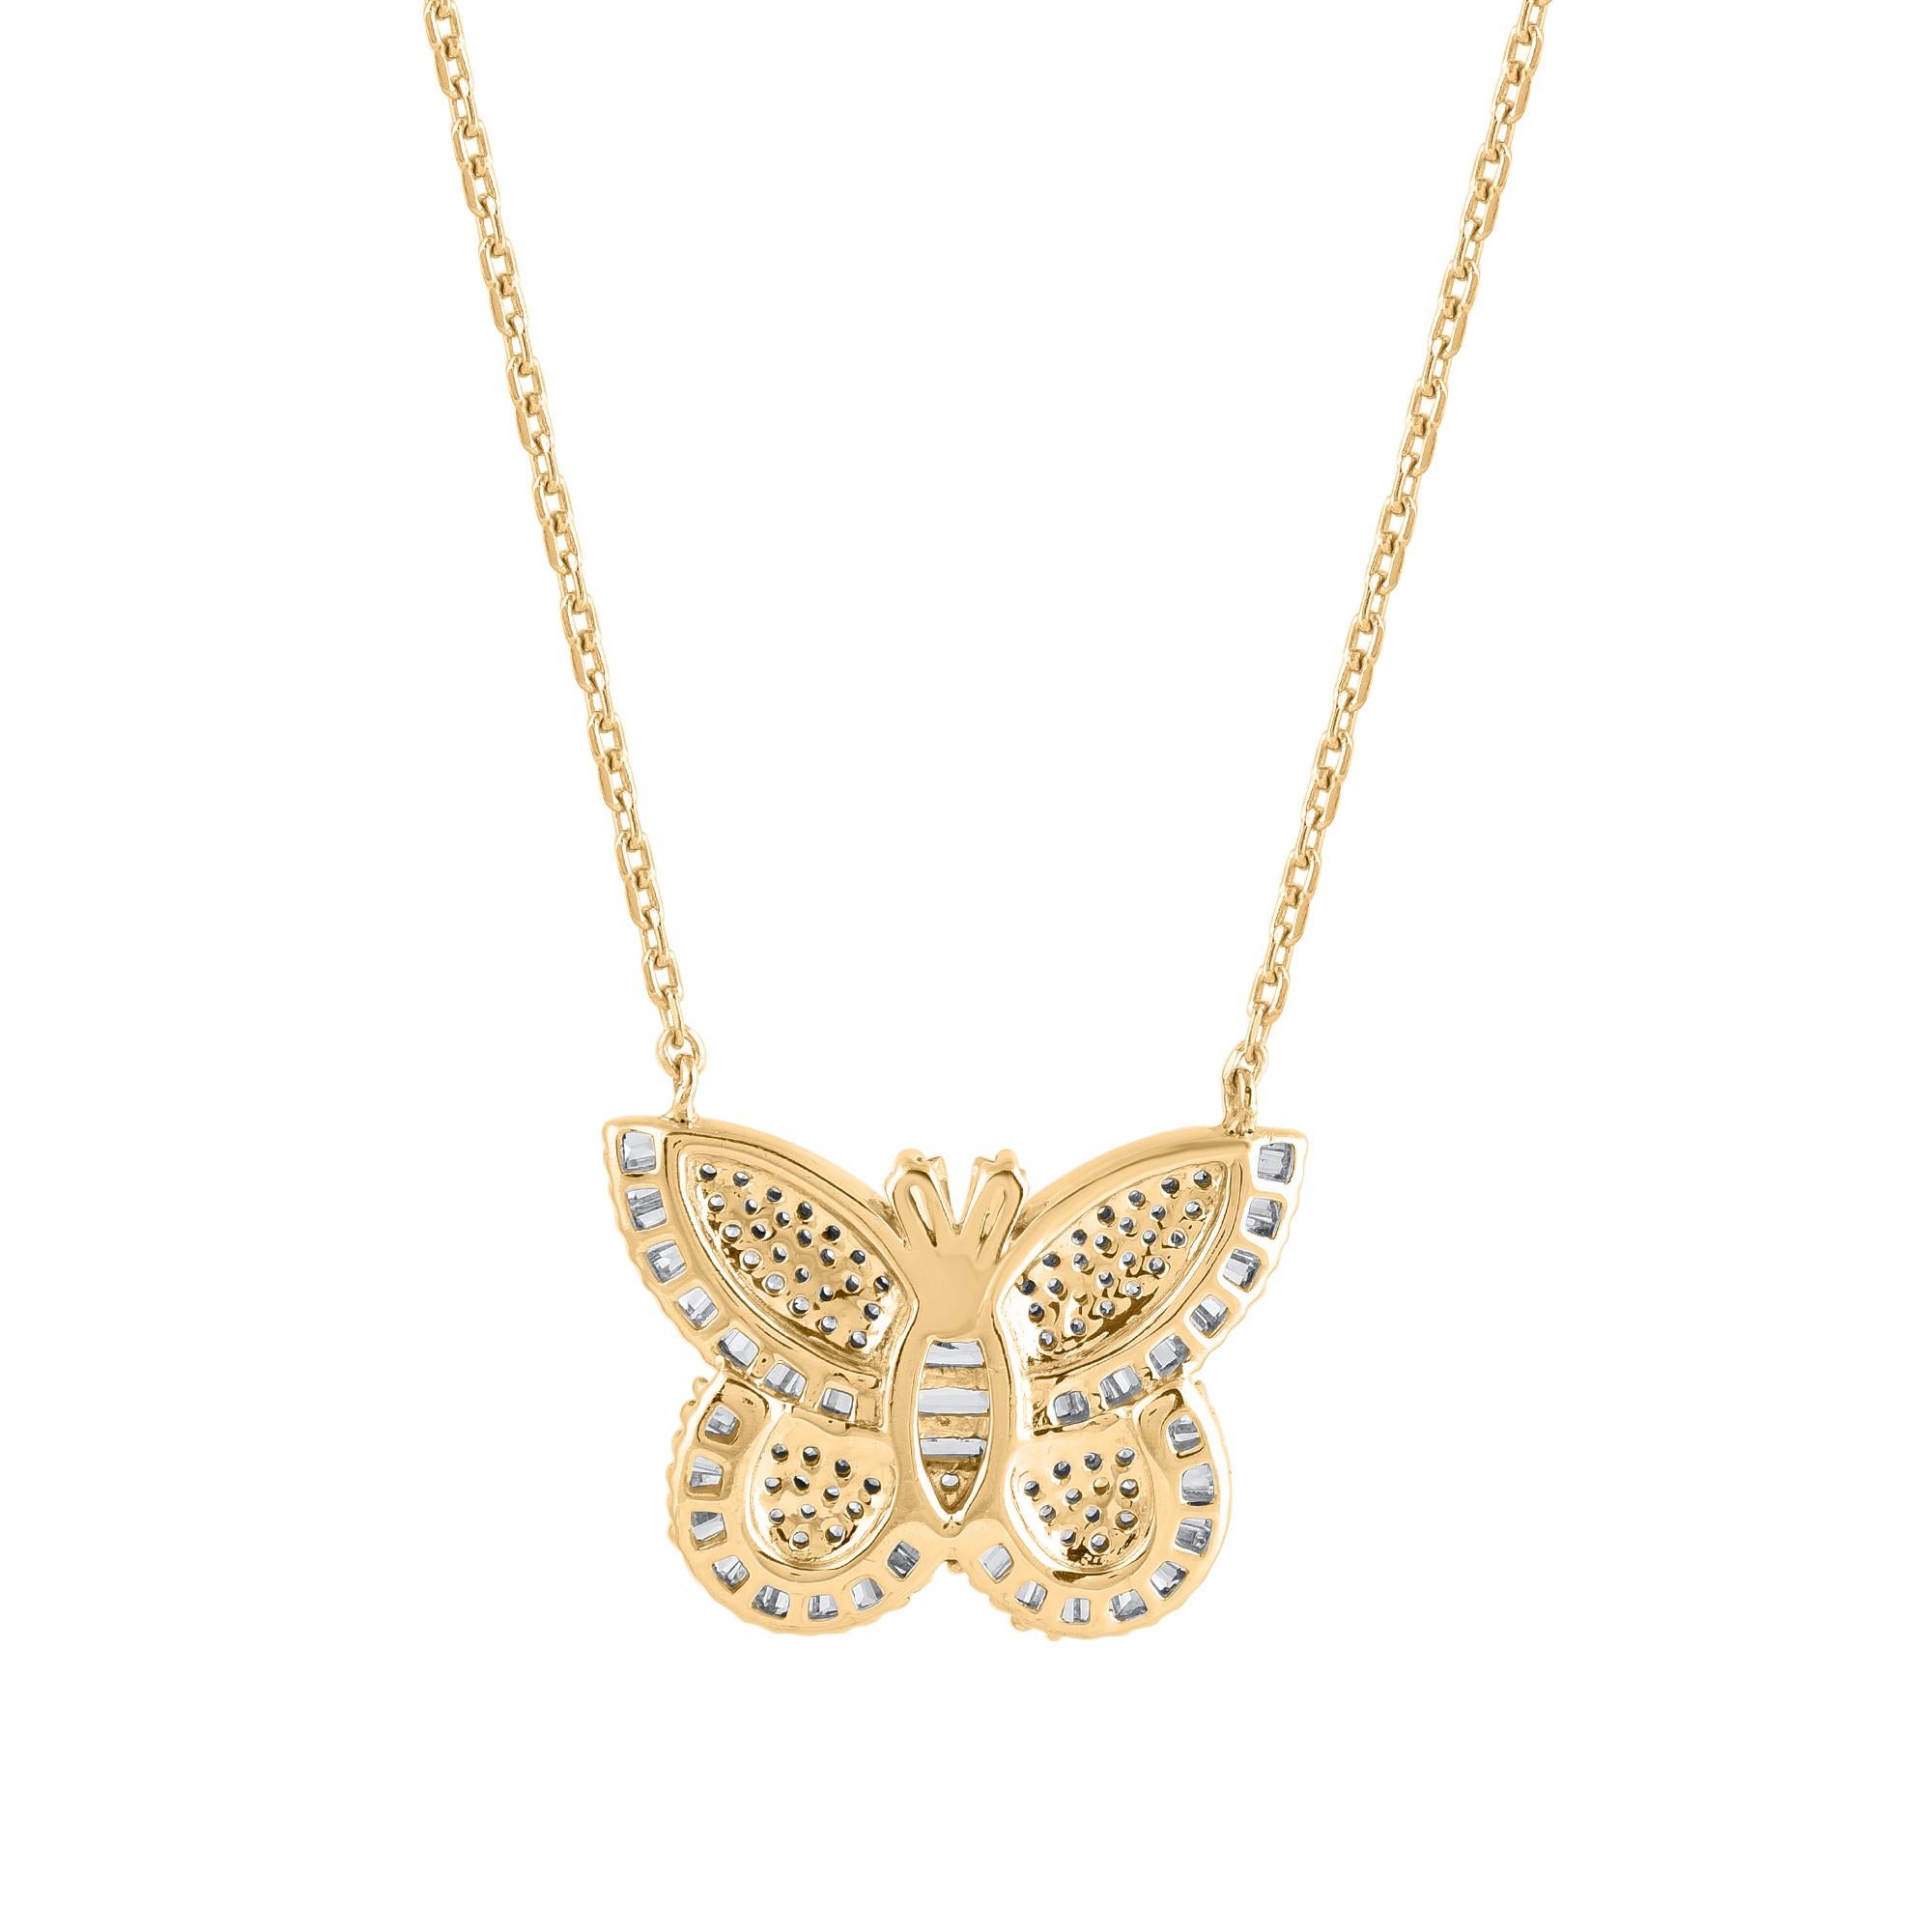 Contemporary TJD 0.60 Carat Baguette Diamond Butterfly Pendant Necklace in 14KT Yellow Gold For Sale